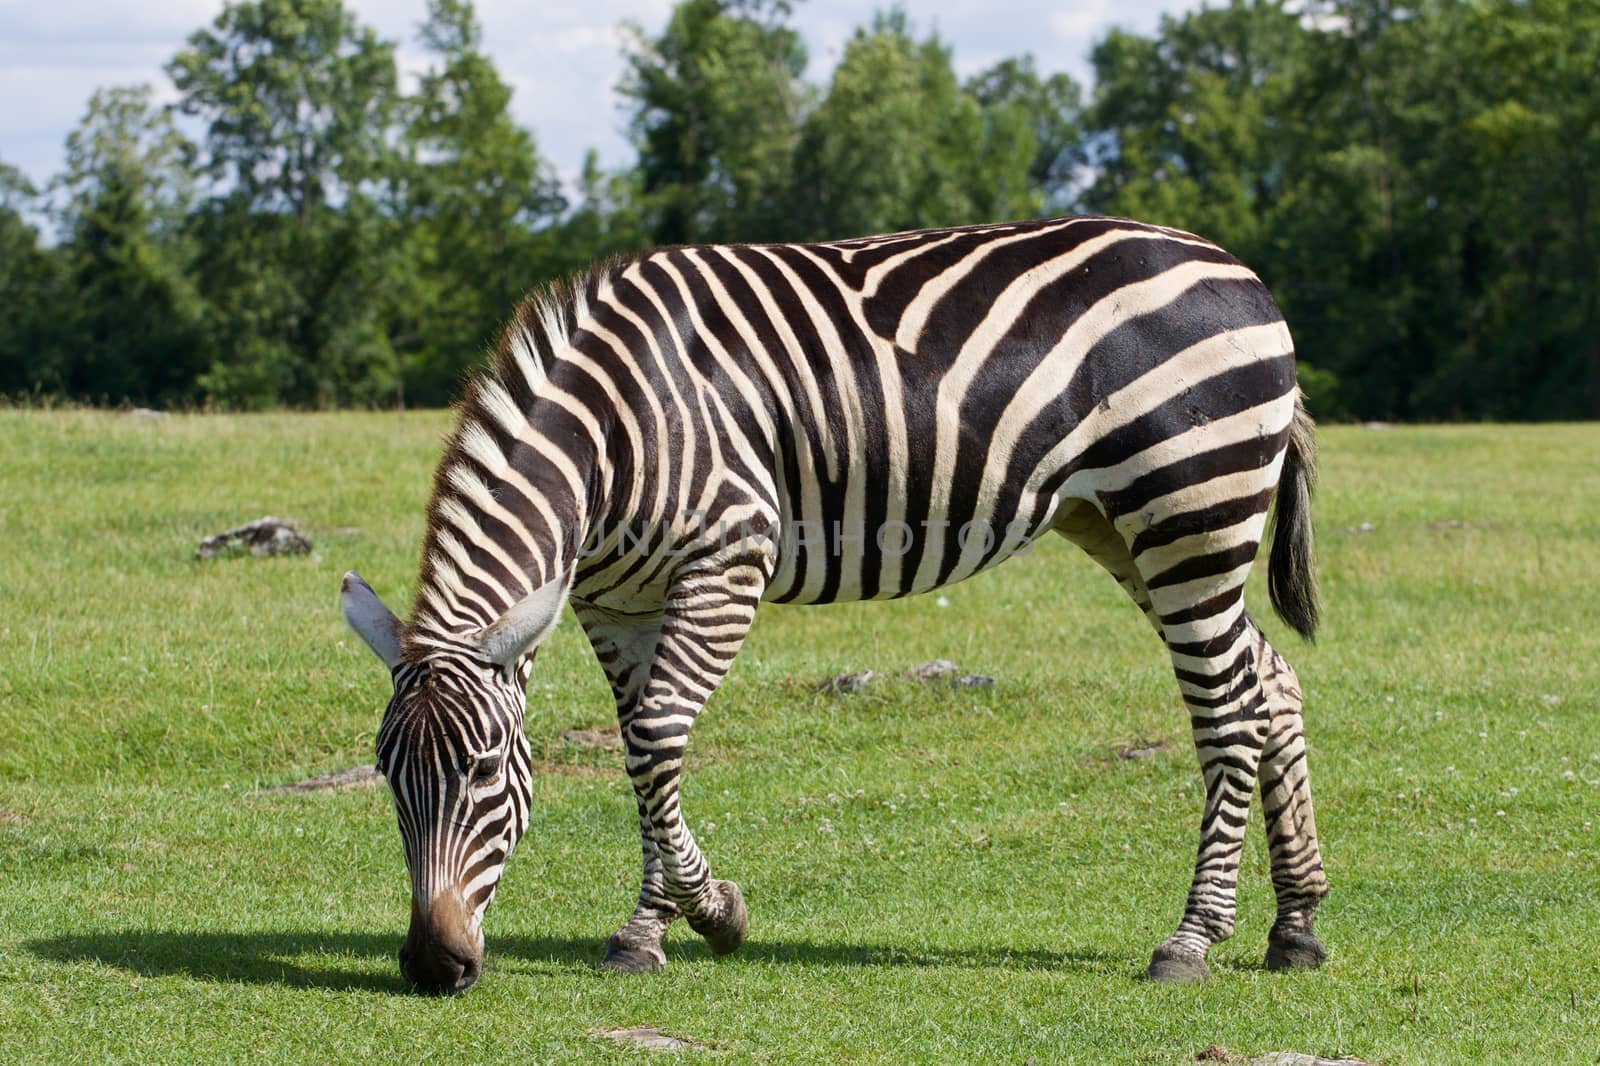 Zebra is going through the grass field by teo